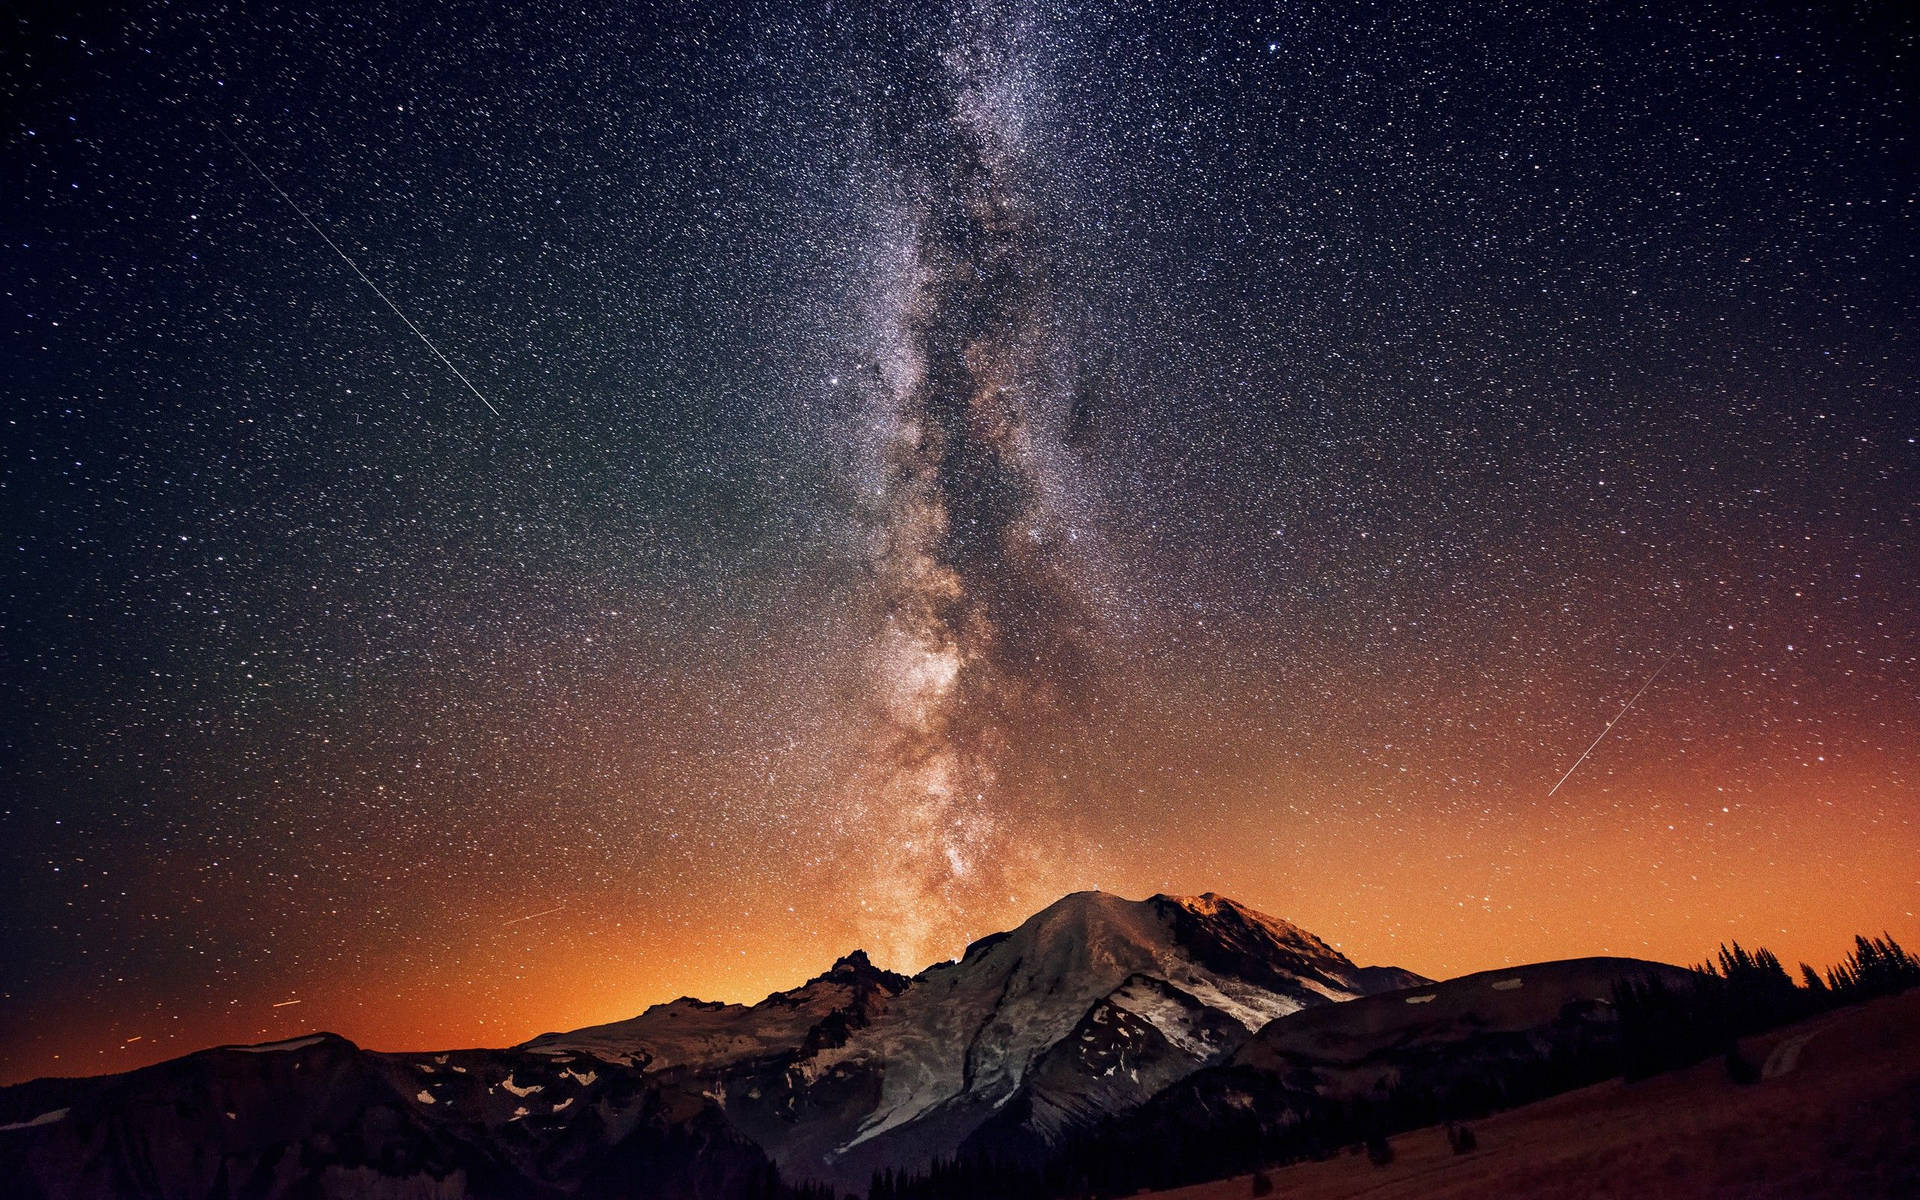 The Milky Way Over A Mountain With Stars In The Sky